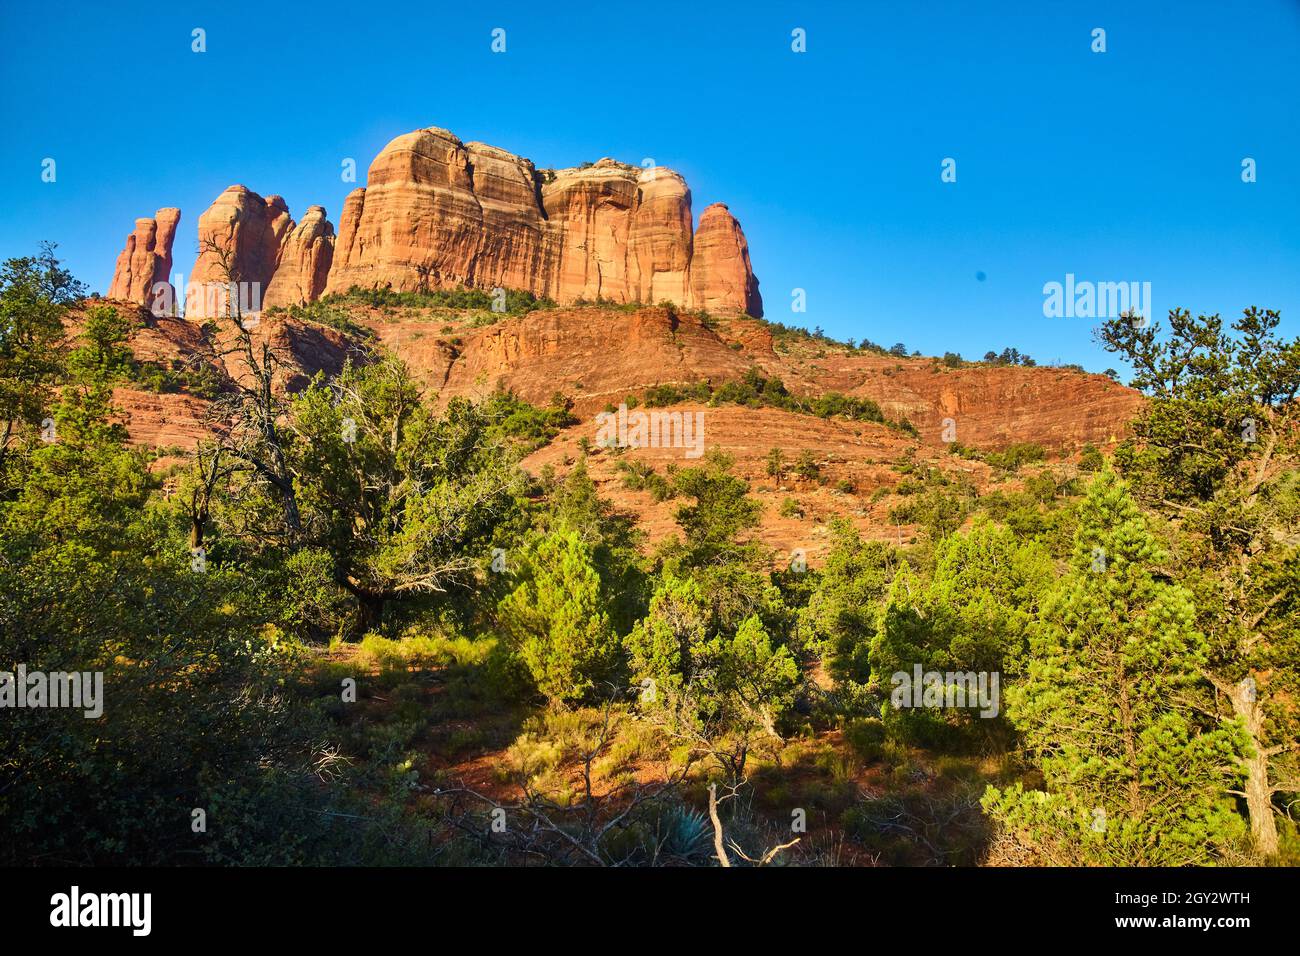 Worm's eye view of an orange Bell Rock peak with trees in the foreground Stock Photo